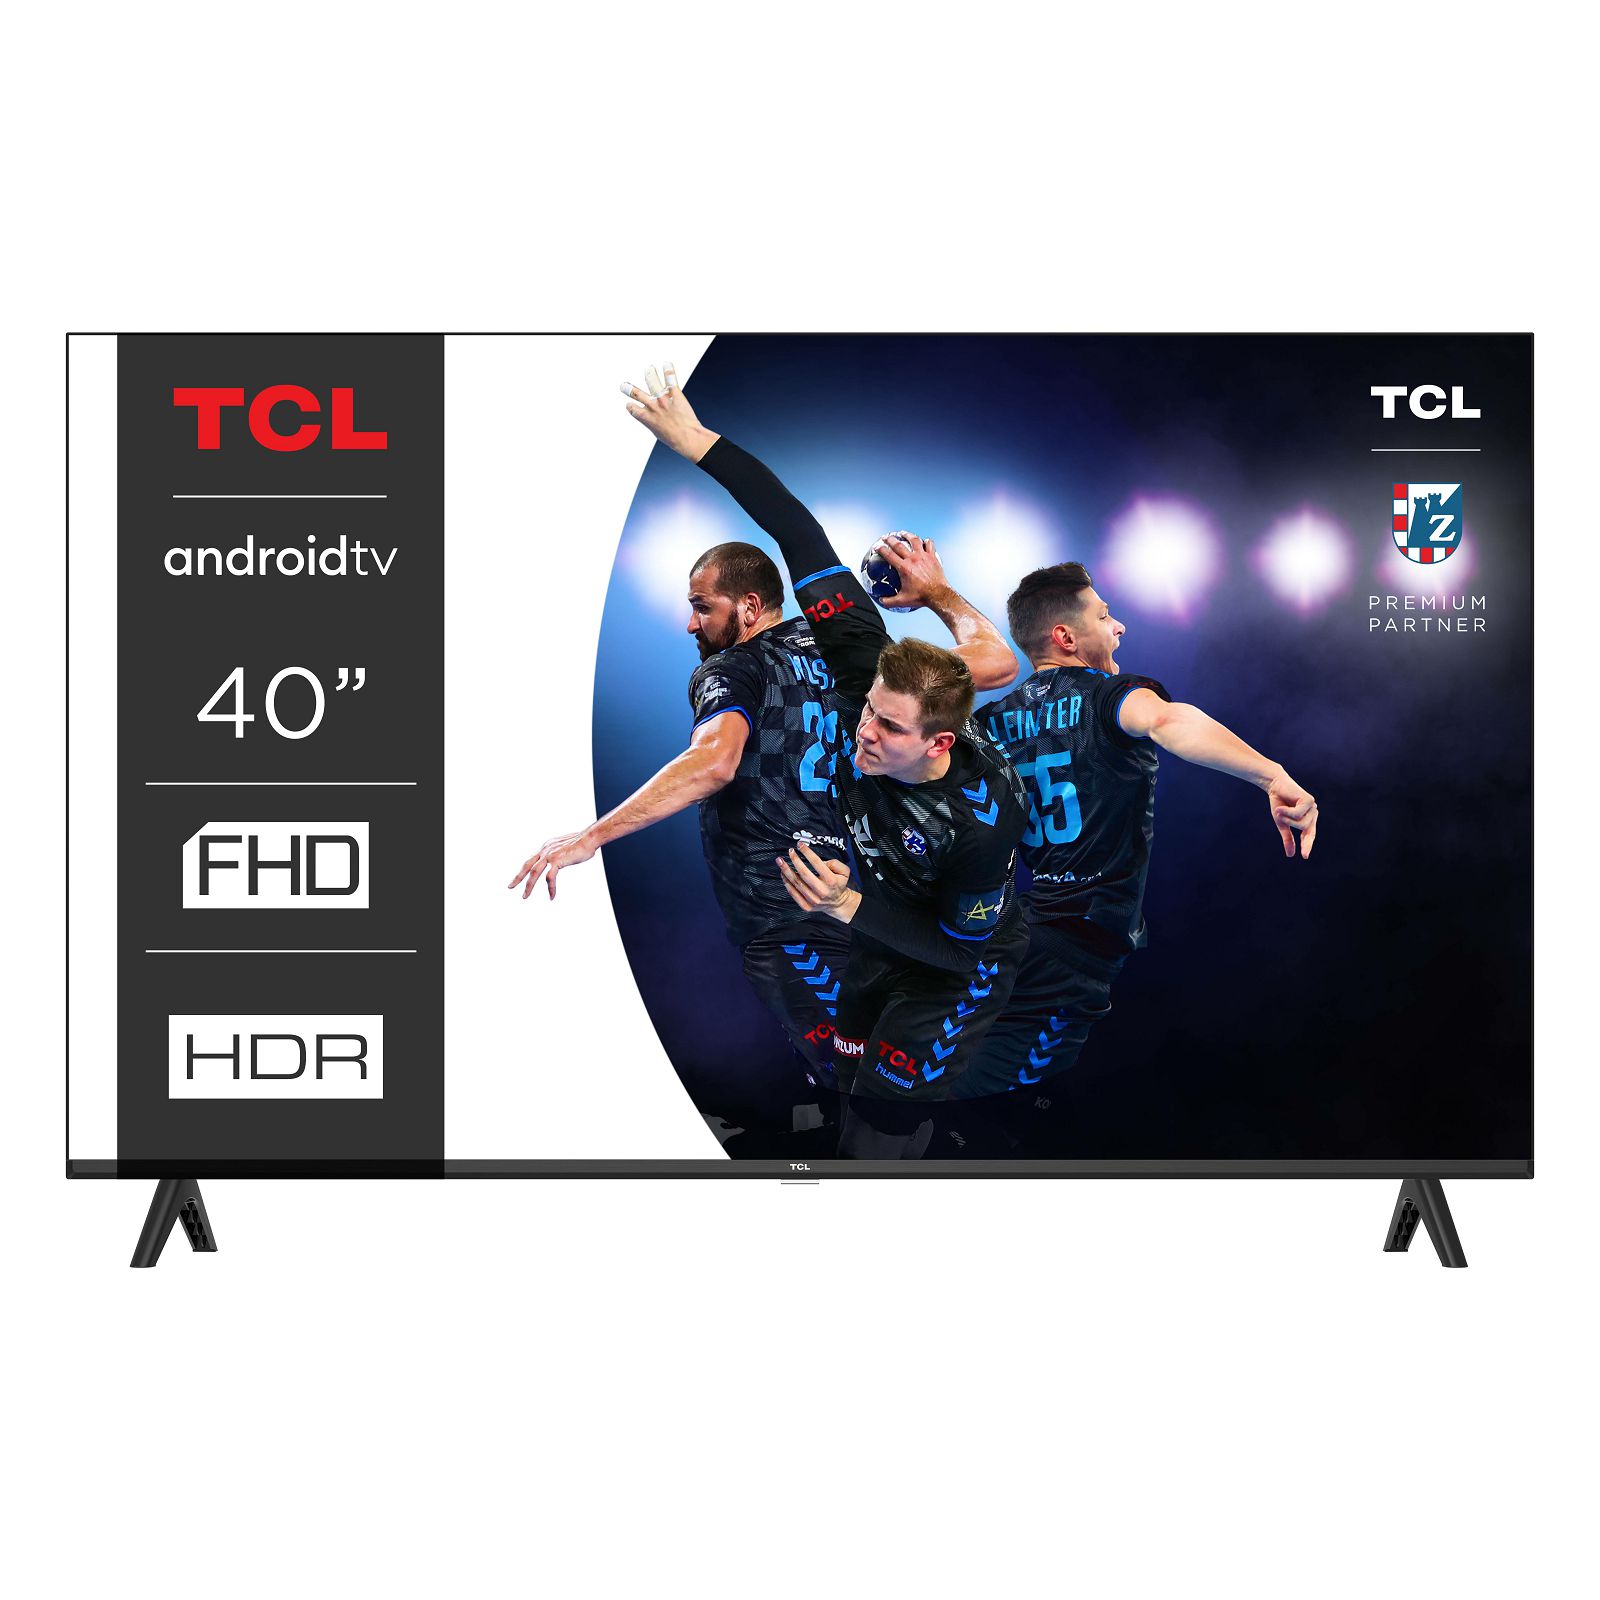 televizor-tcl-led-tv-40s5400a-fhd-android-tv-71227_45659.jpg